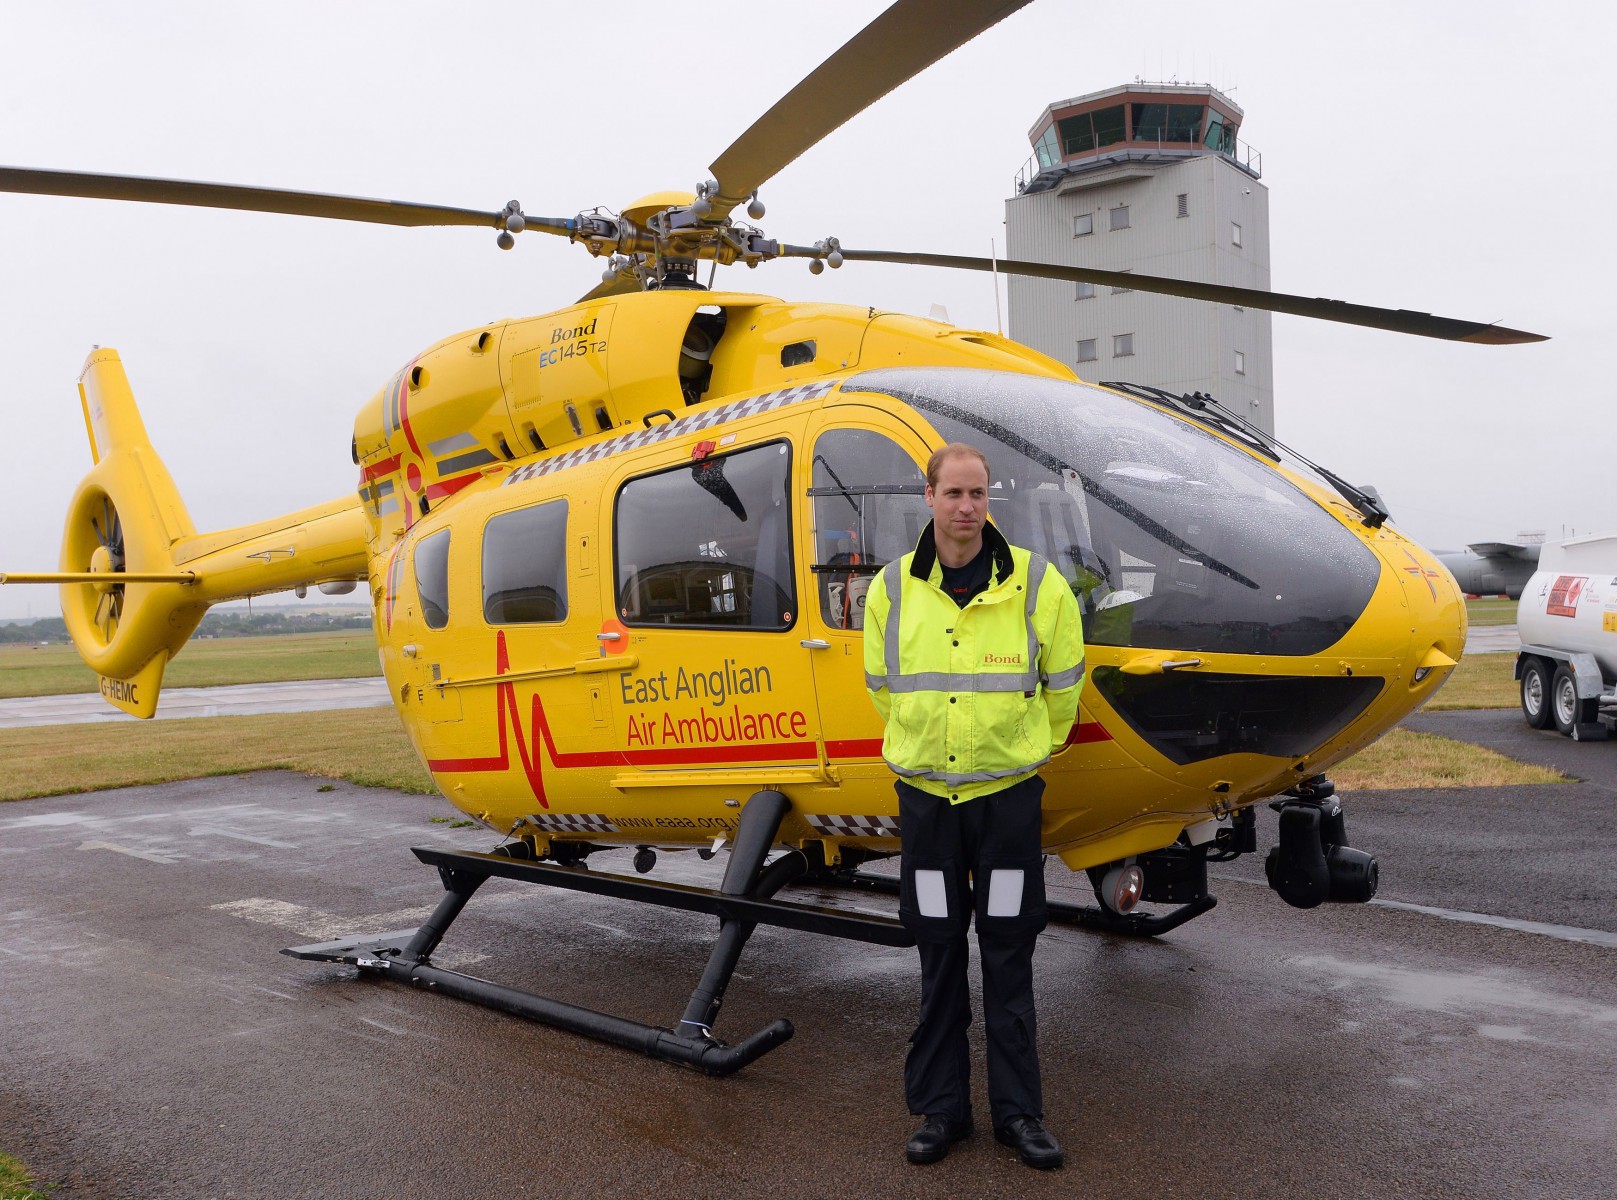 The Duke of Cambridge experienced the strain on blue-light crews first-hand during his stint as an air ambulance pilot